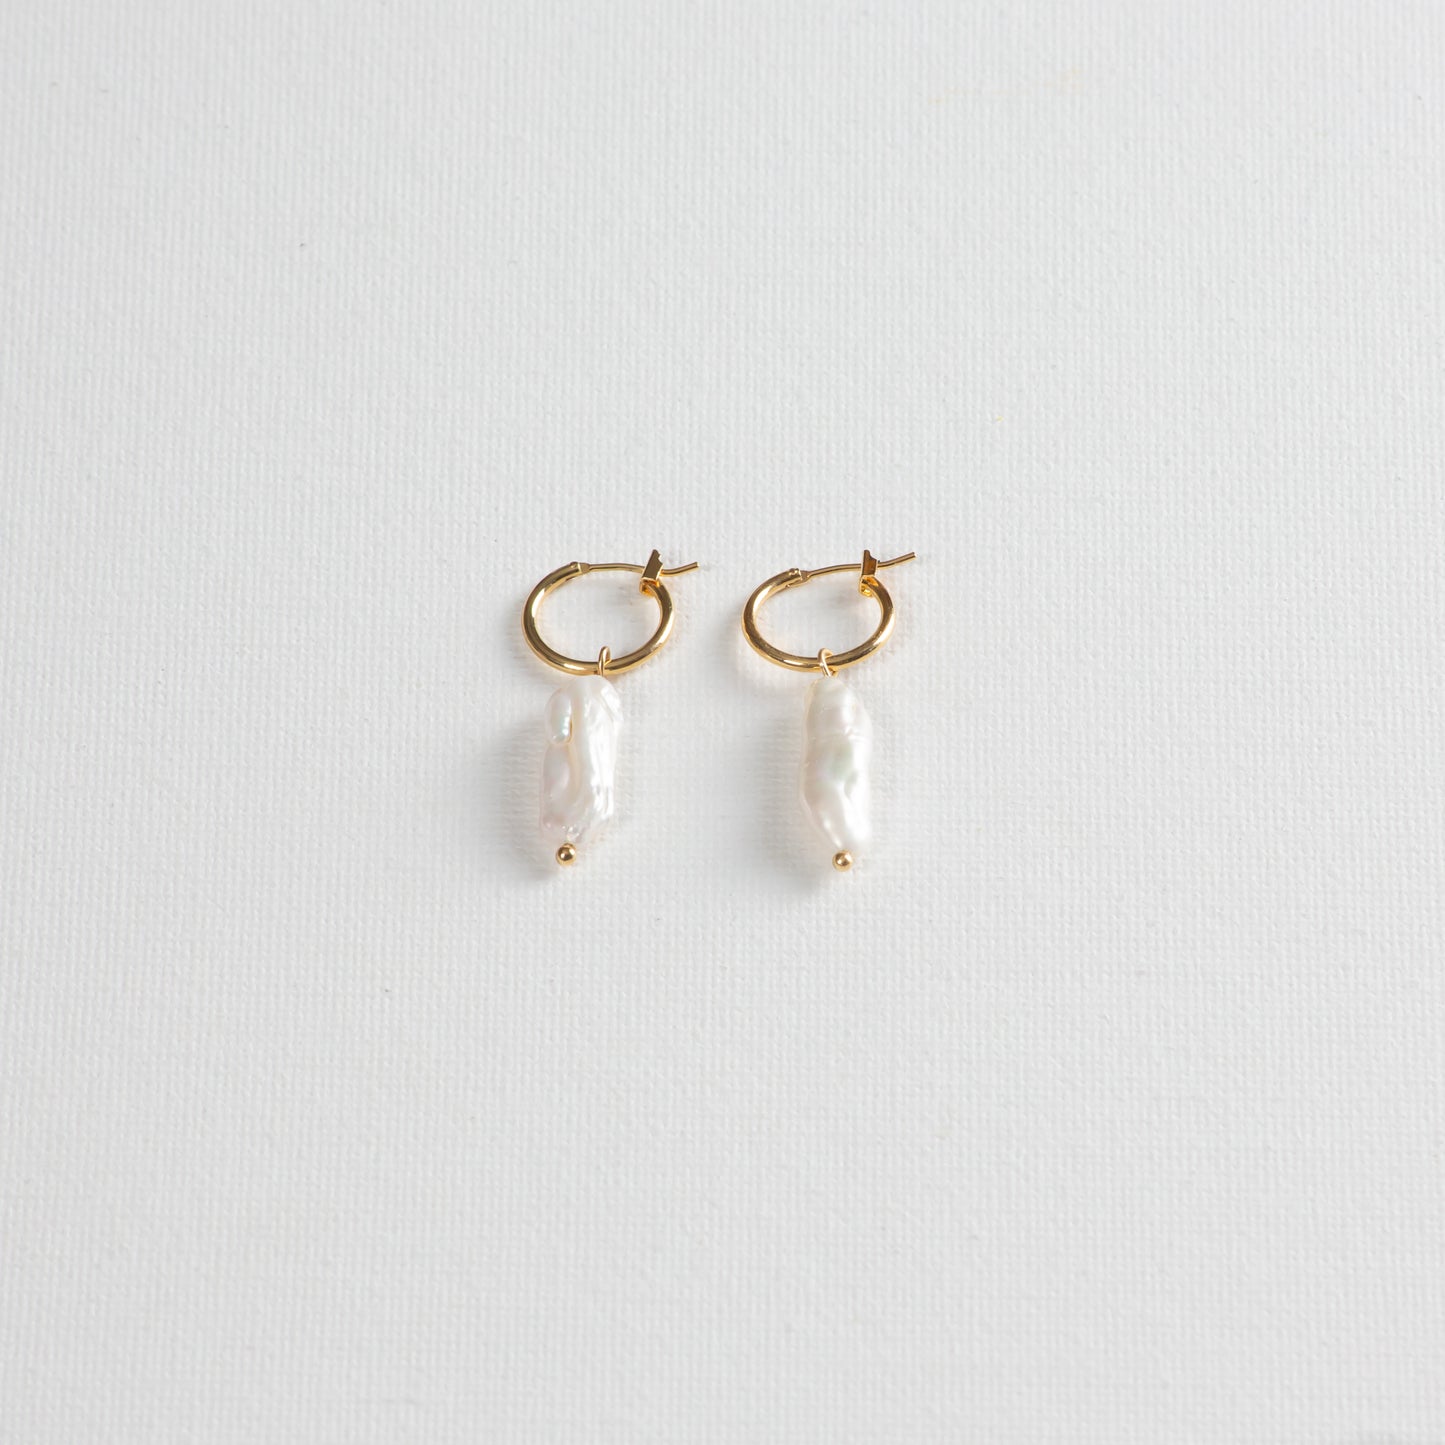 Delicate gold hoops with baroque pearl pendant on a white background.